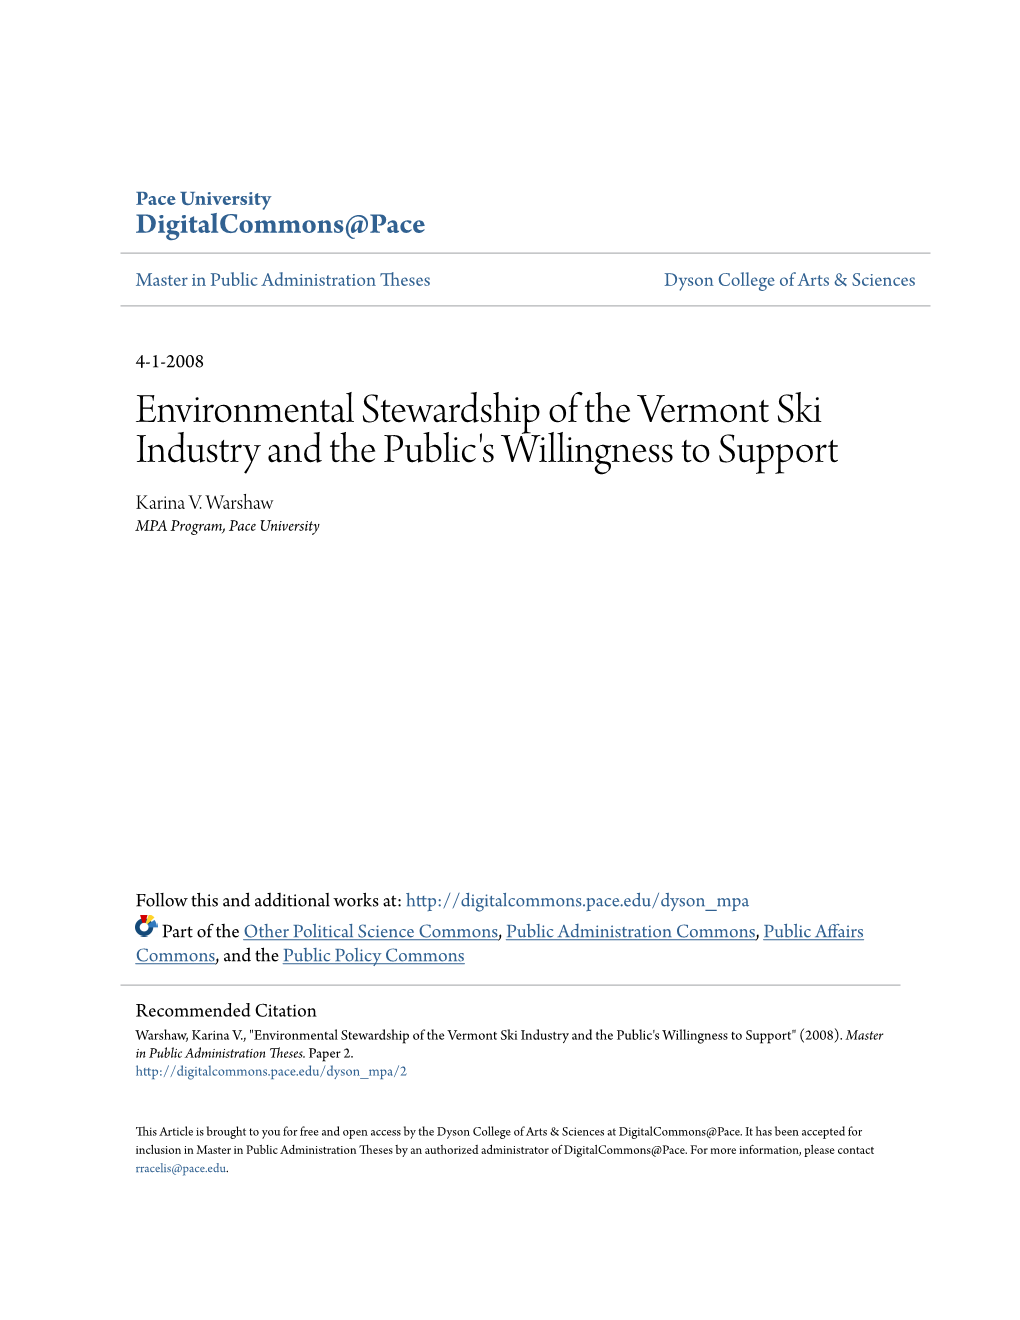 Environmental Stewardship of the Vermont Ski Industry and the Public's Willingness to Support Karina V